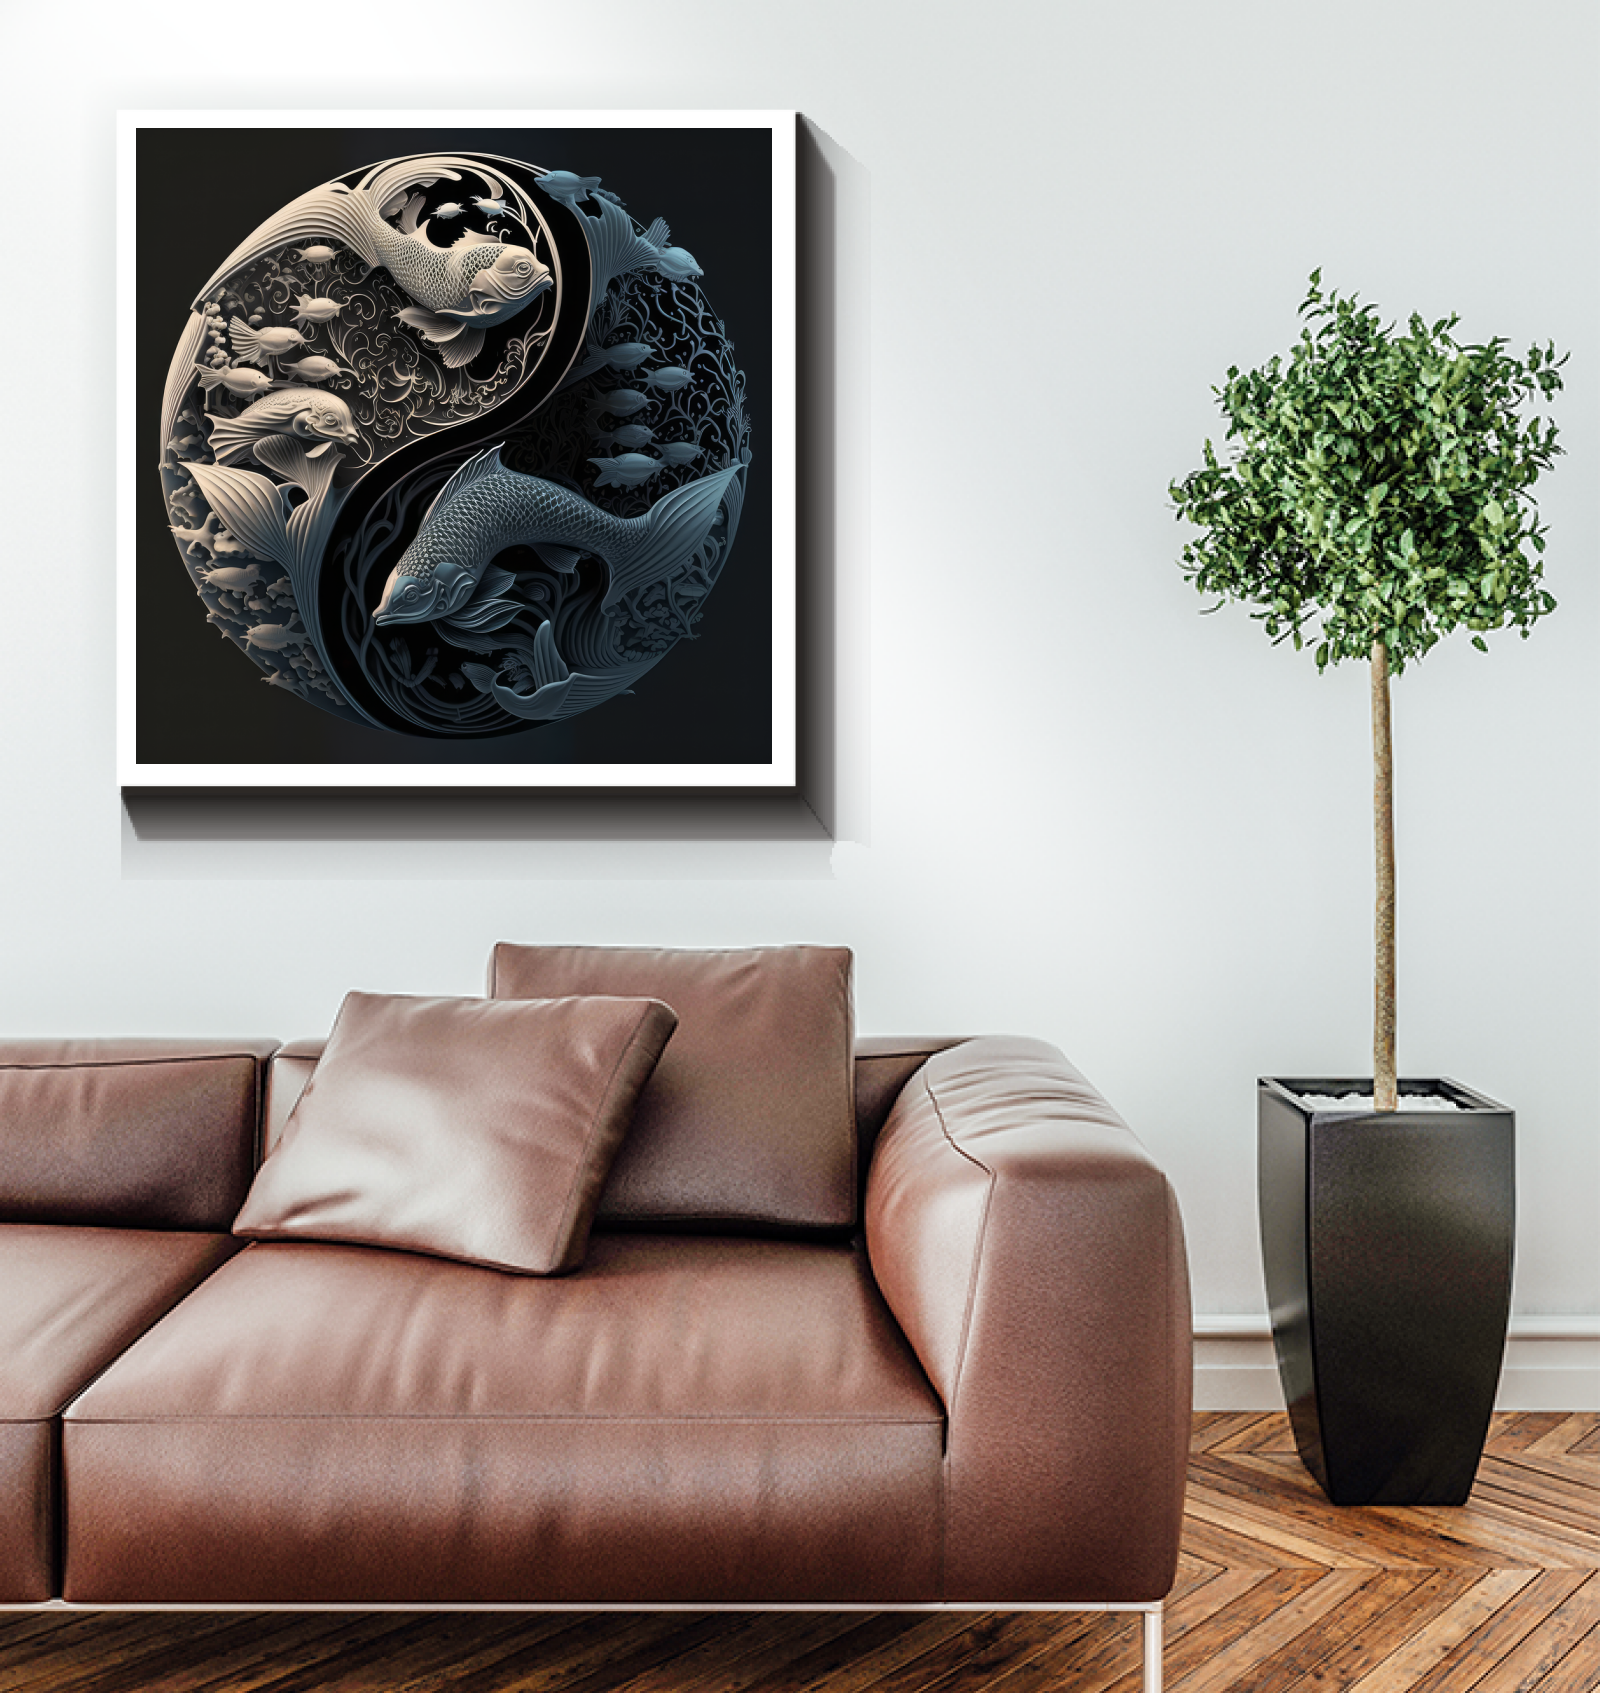 Peaceful equinox art perfect for living room or office.